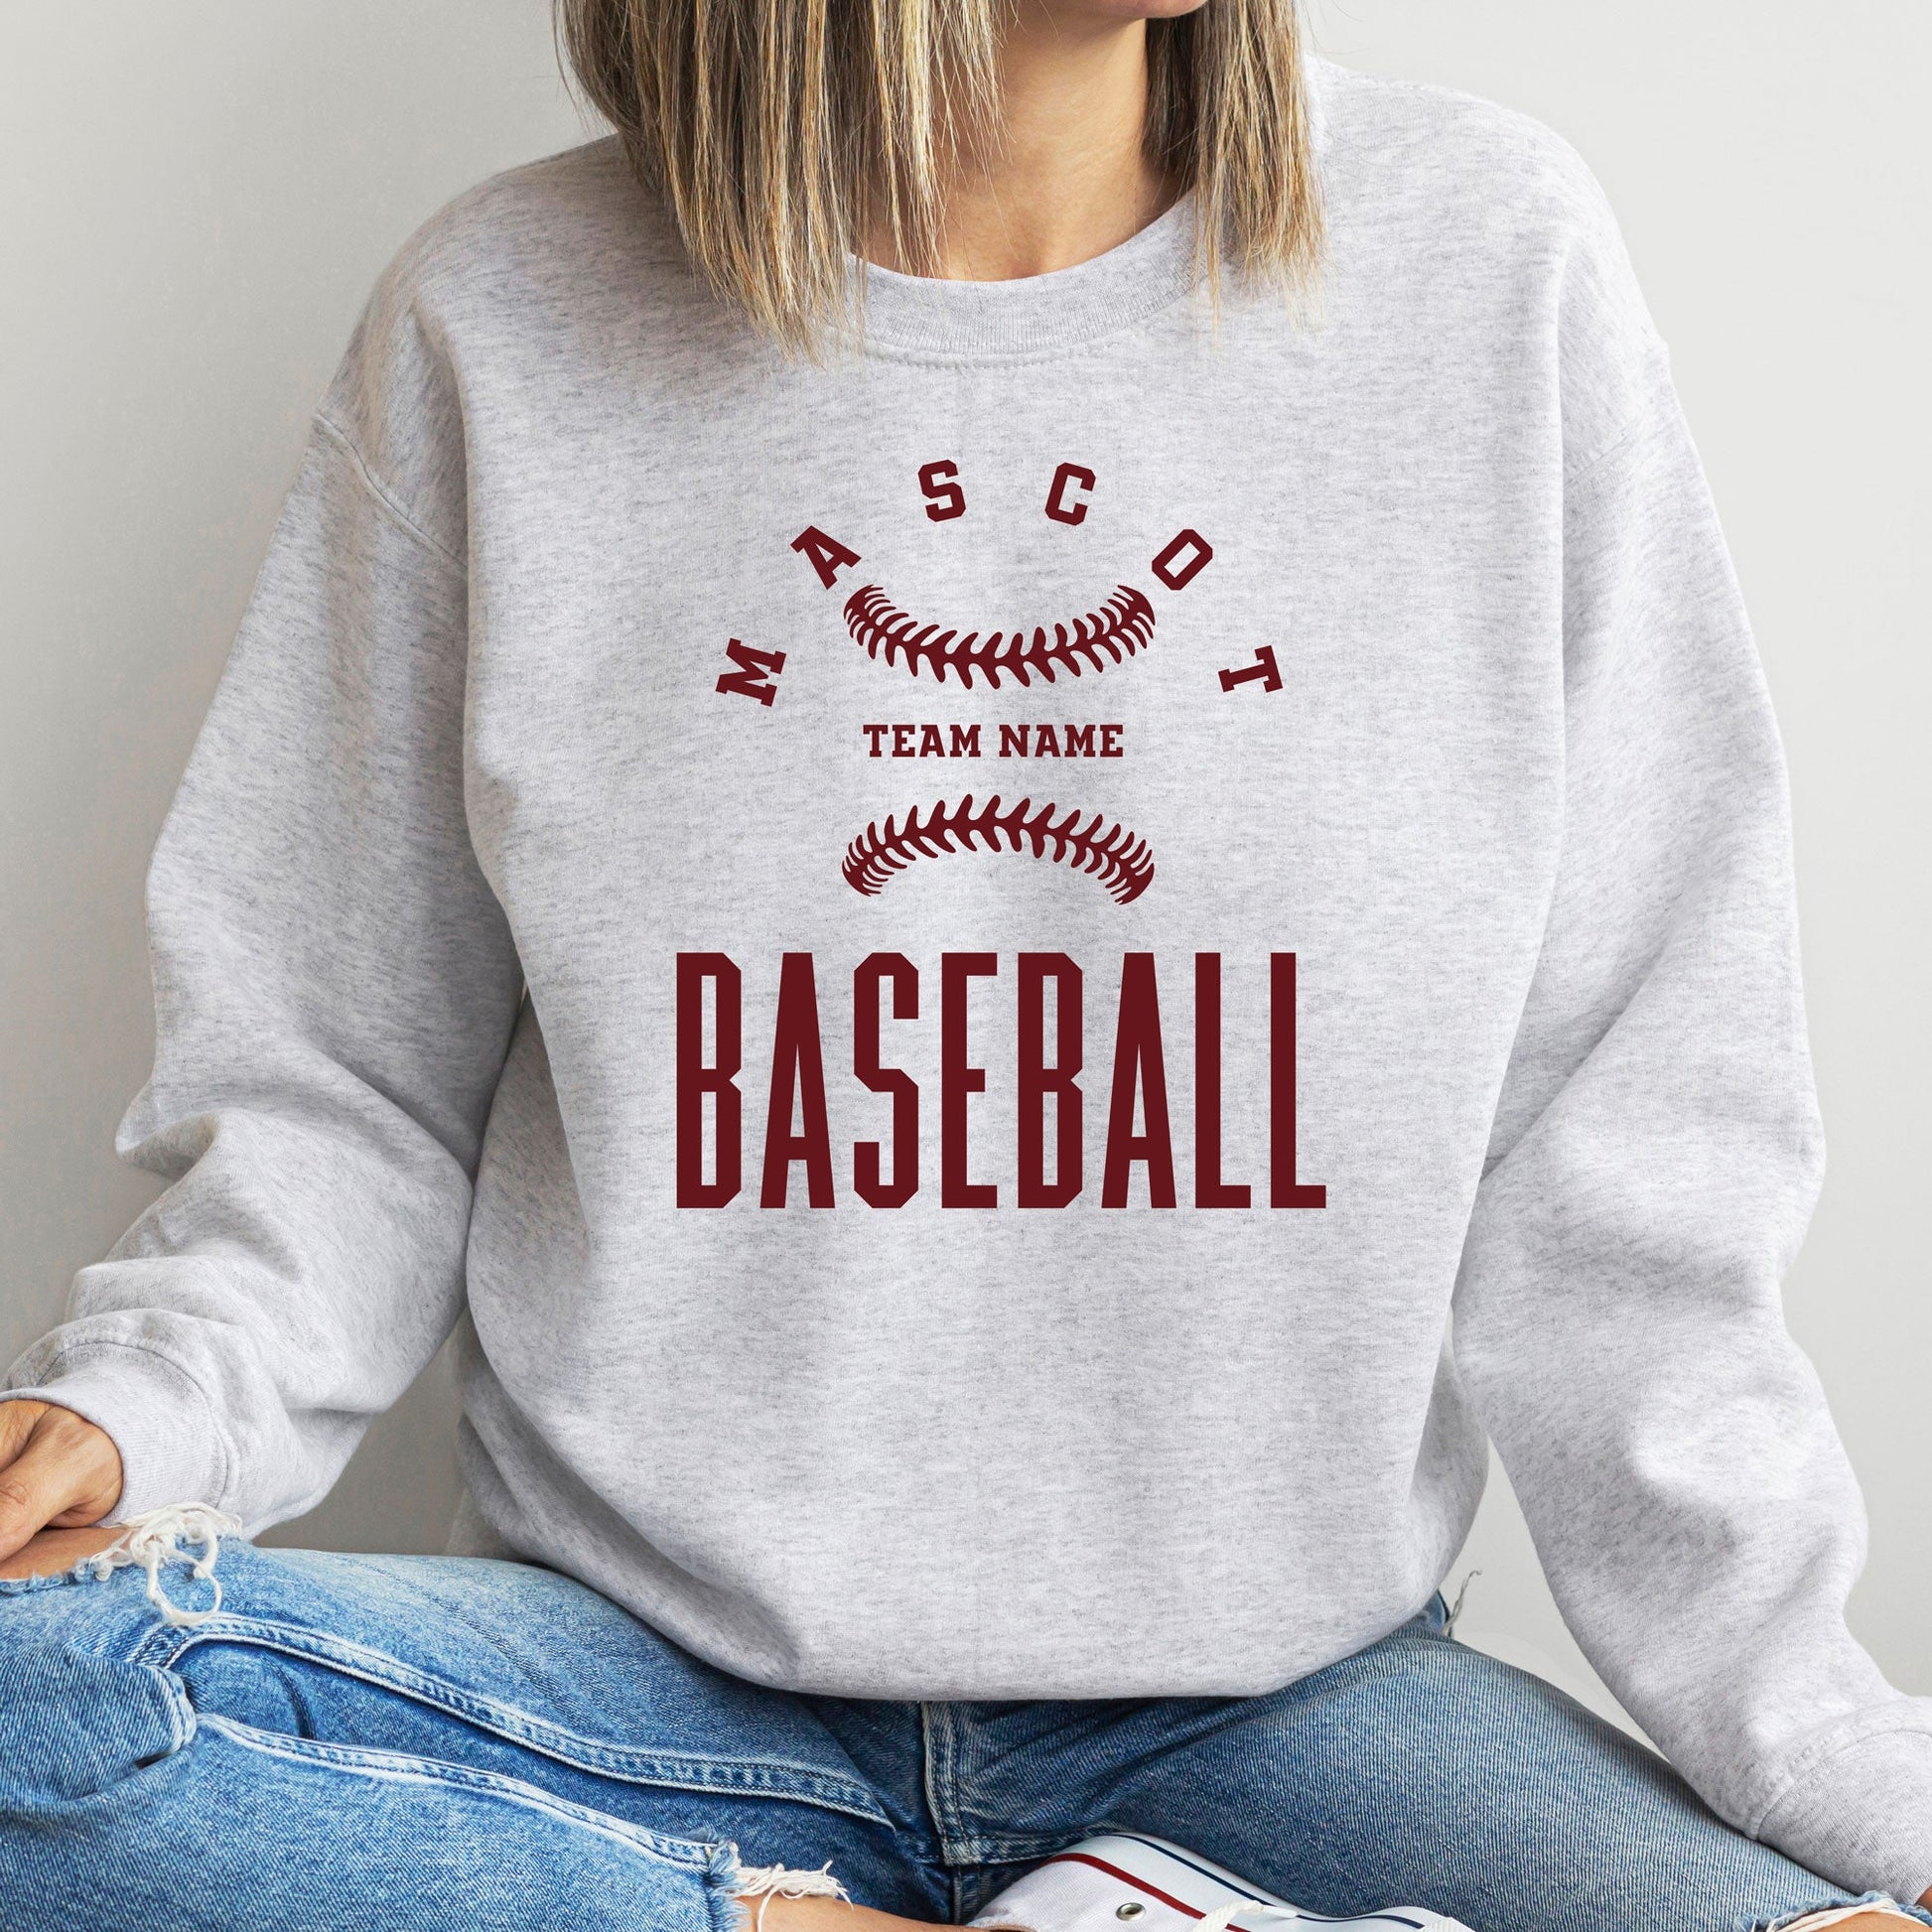 personalized ash sweatshirt featuring a custom design with a baseball, team mascot, and team name